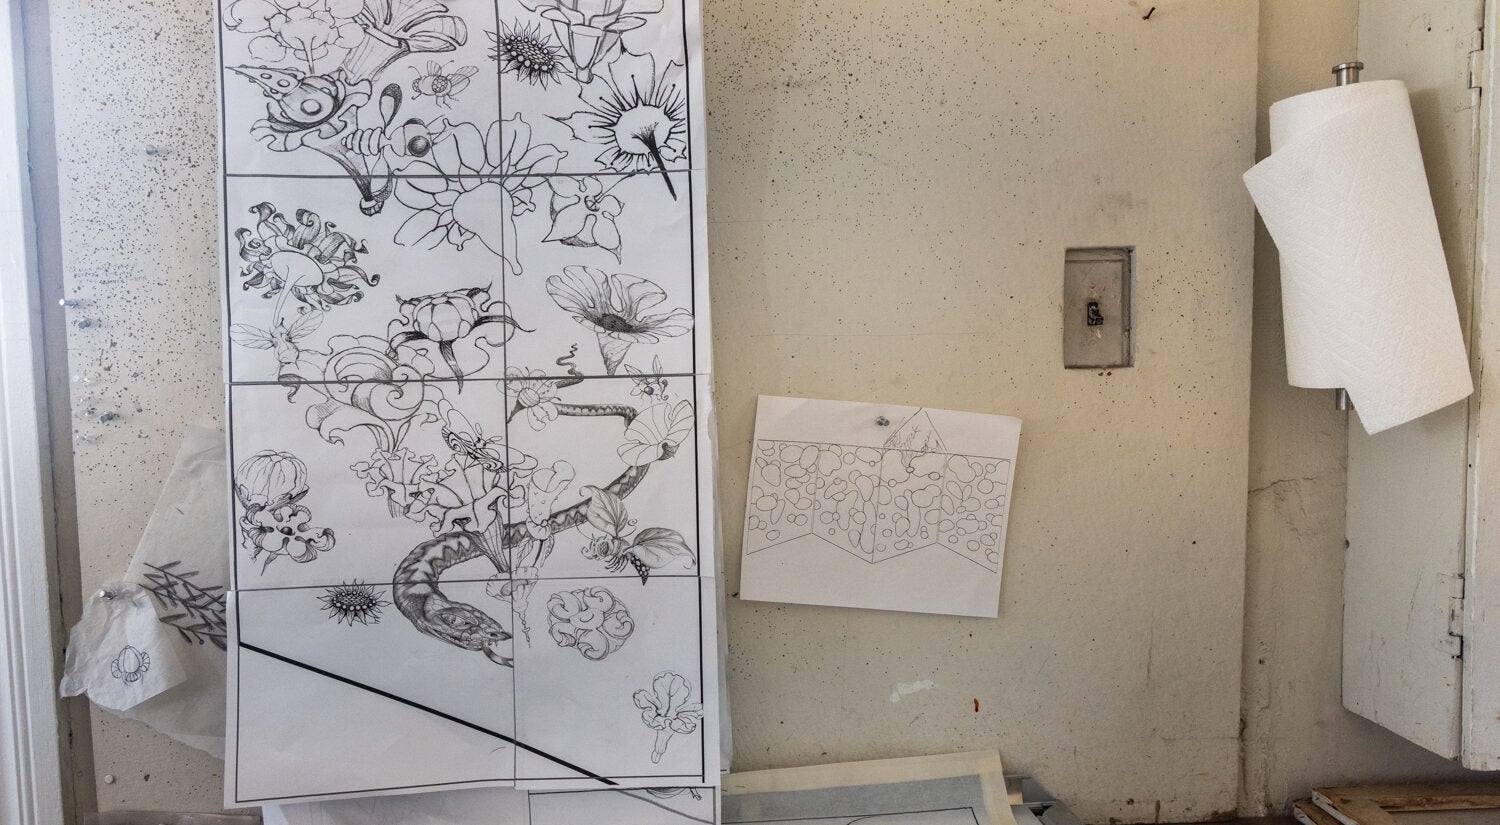 Schaechter’s sketches show flowering objects